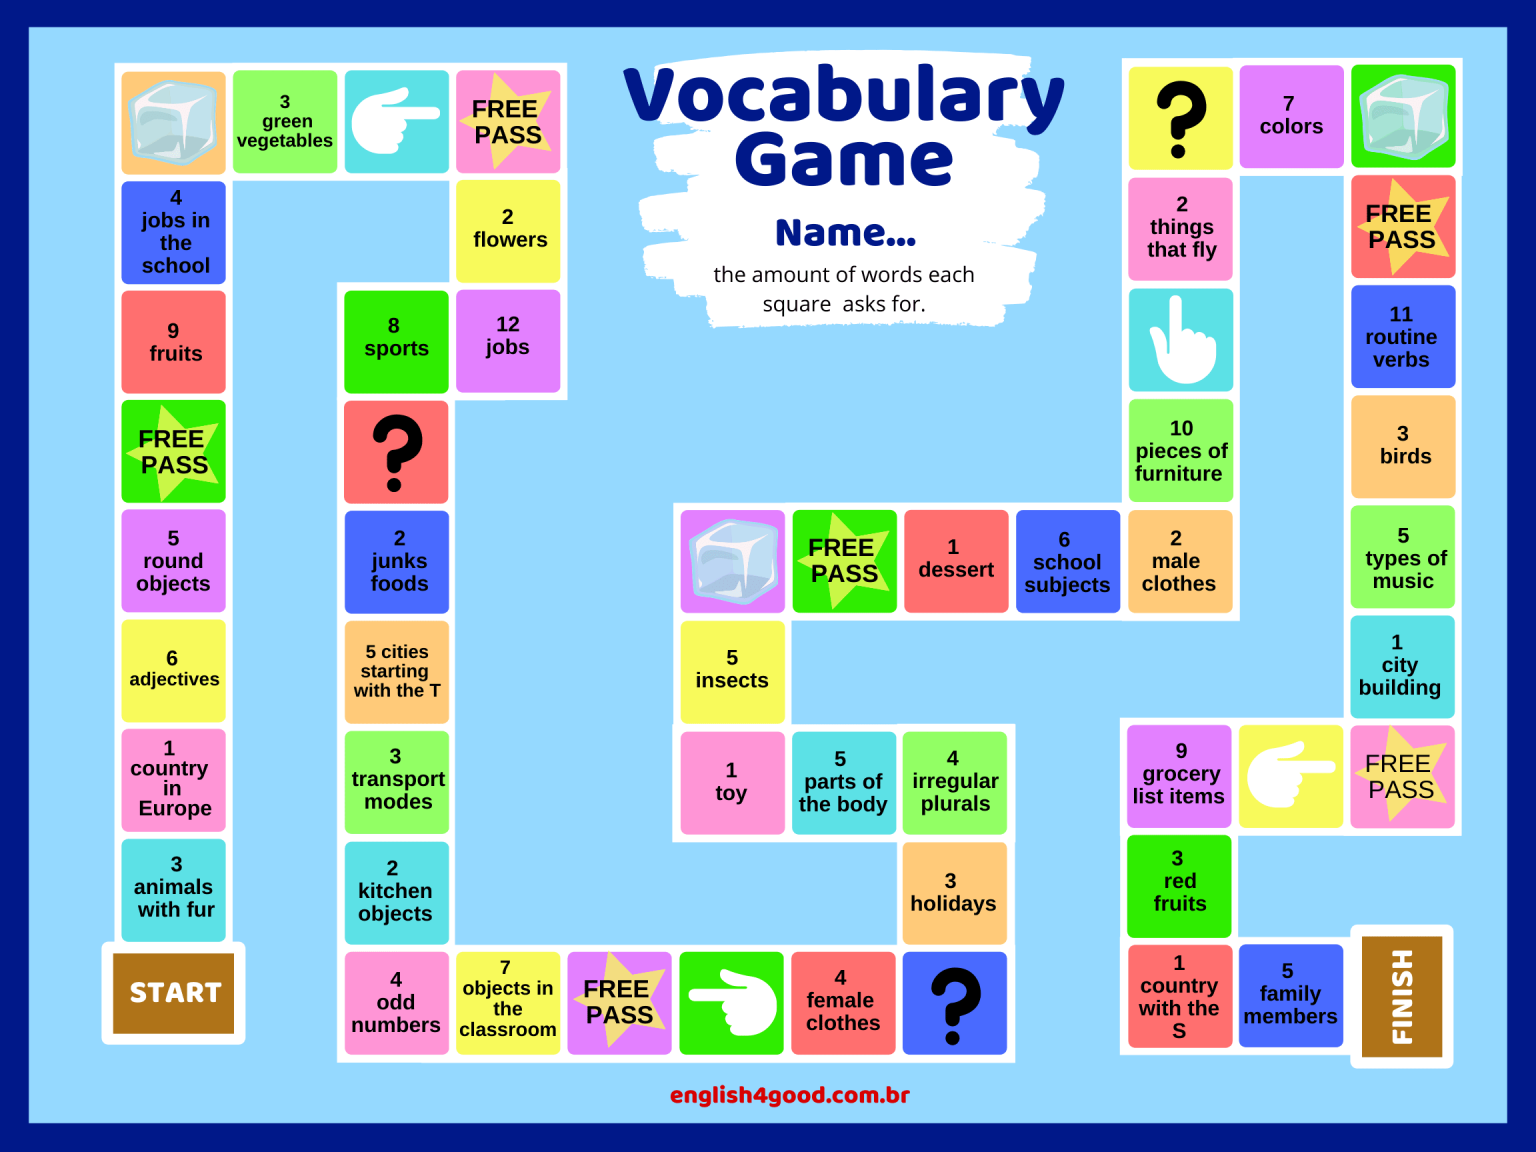 the use of games for vocabulary presentation and revision